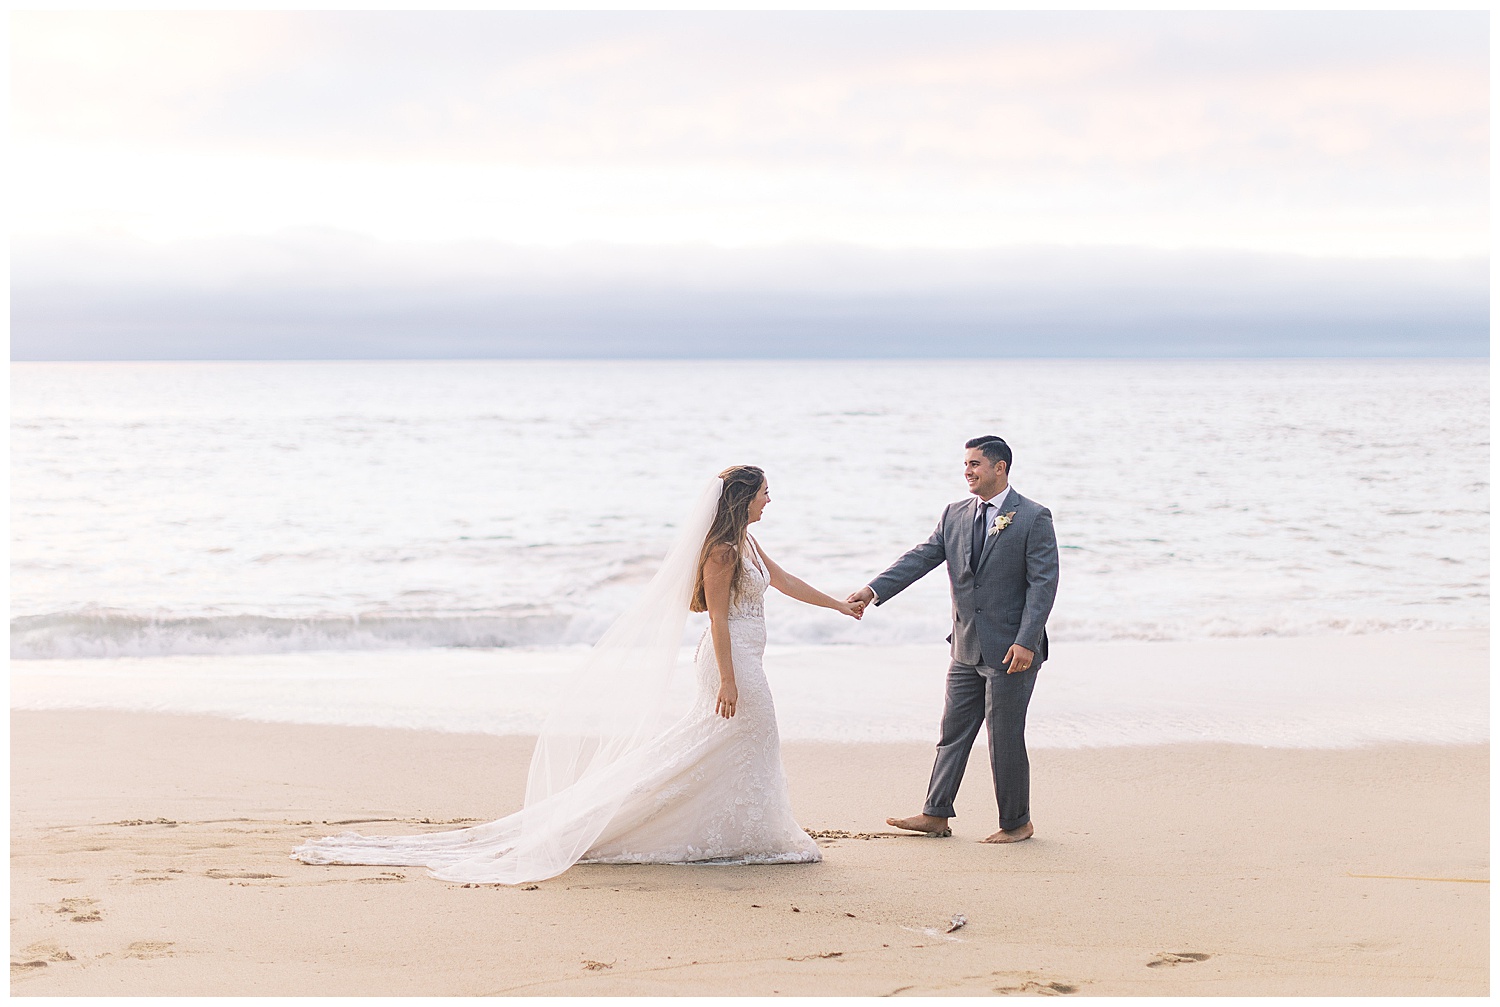 landscape shot of the bride and groom enjoying their Big Sur adventure elopement on the beach by film photographer AGS Photo Art